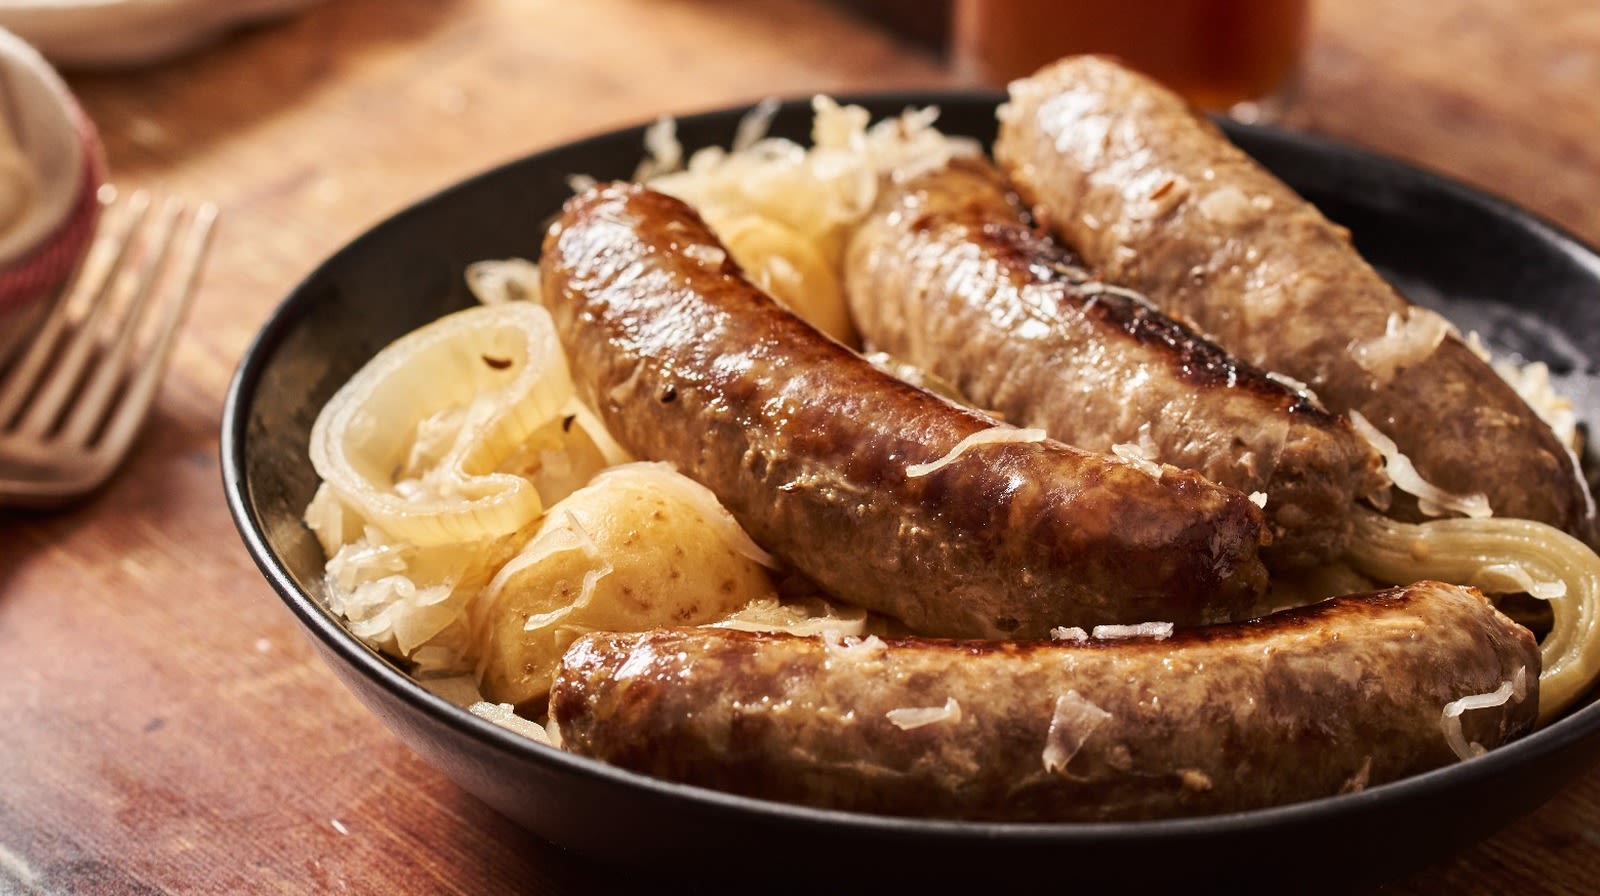 The Only Brews You Should Be Using When Slow Cooking Beer Brats